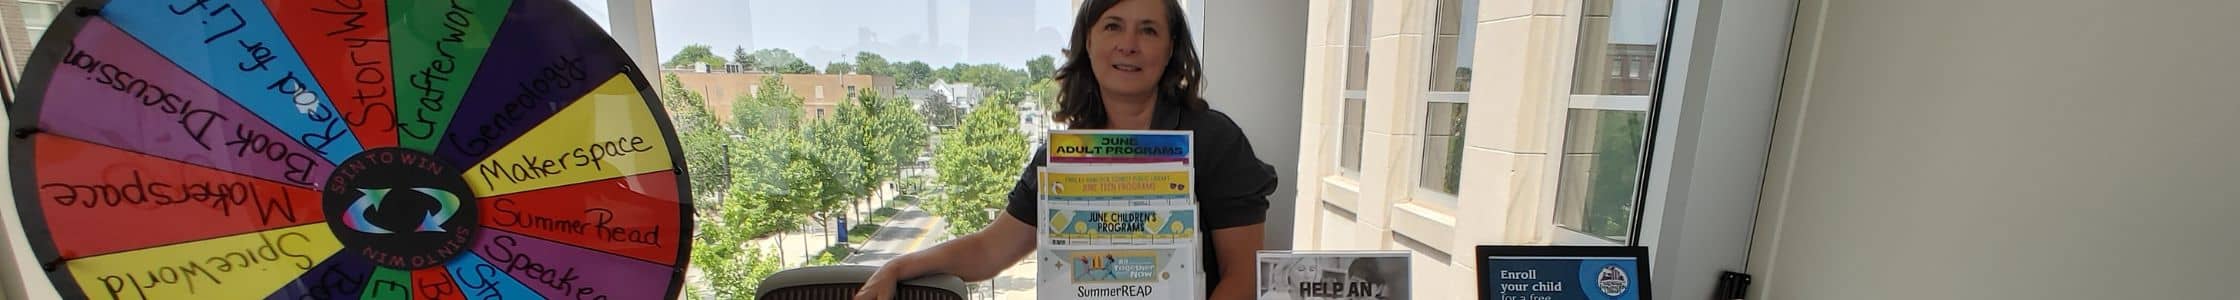 Outreach coordinator at an event with table of handouts of library information and colorful wheel for game